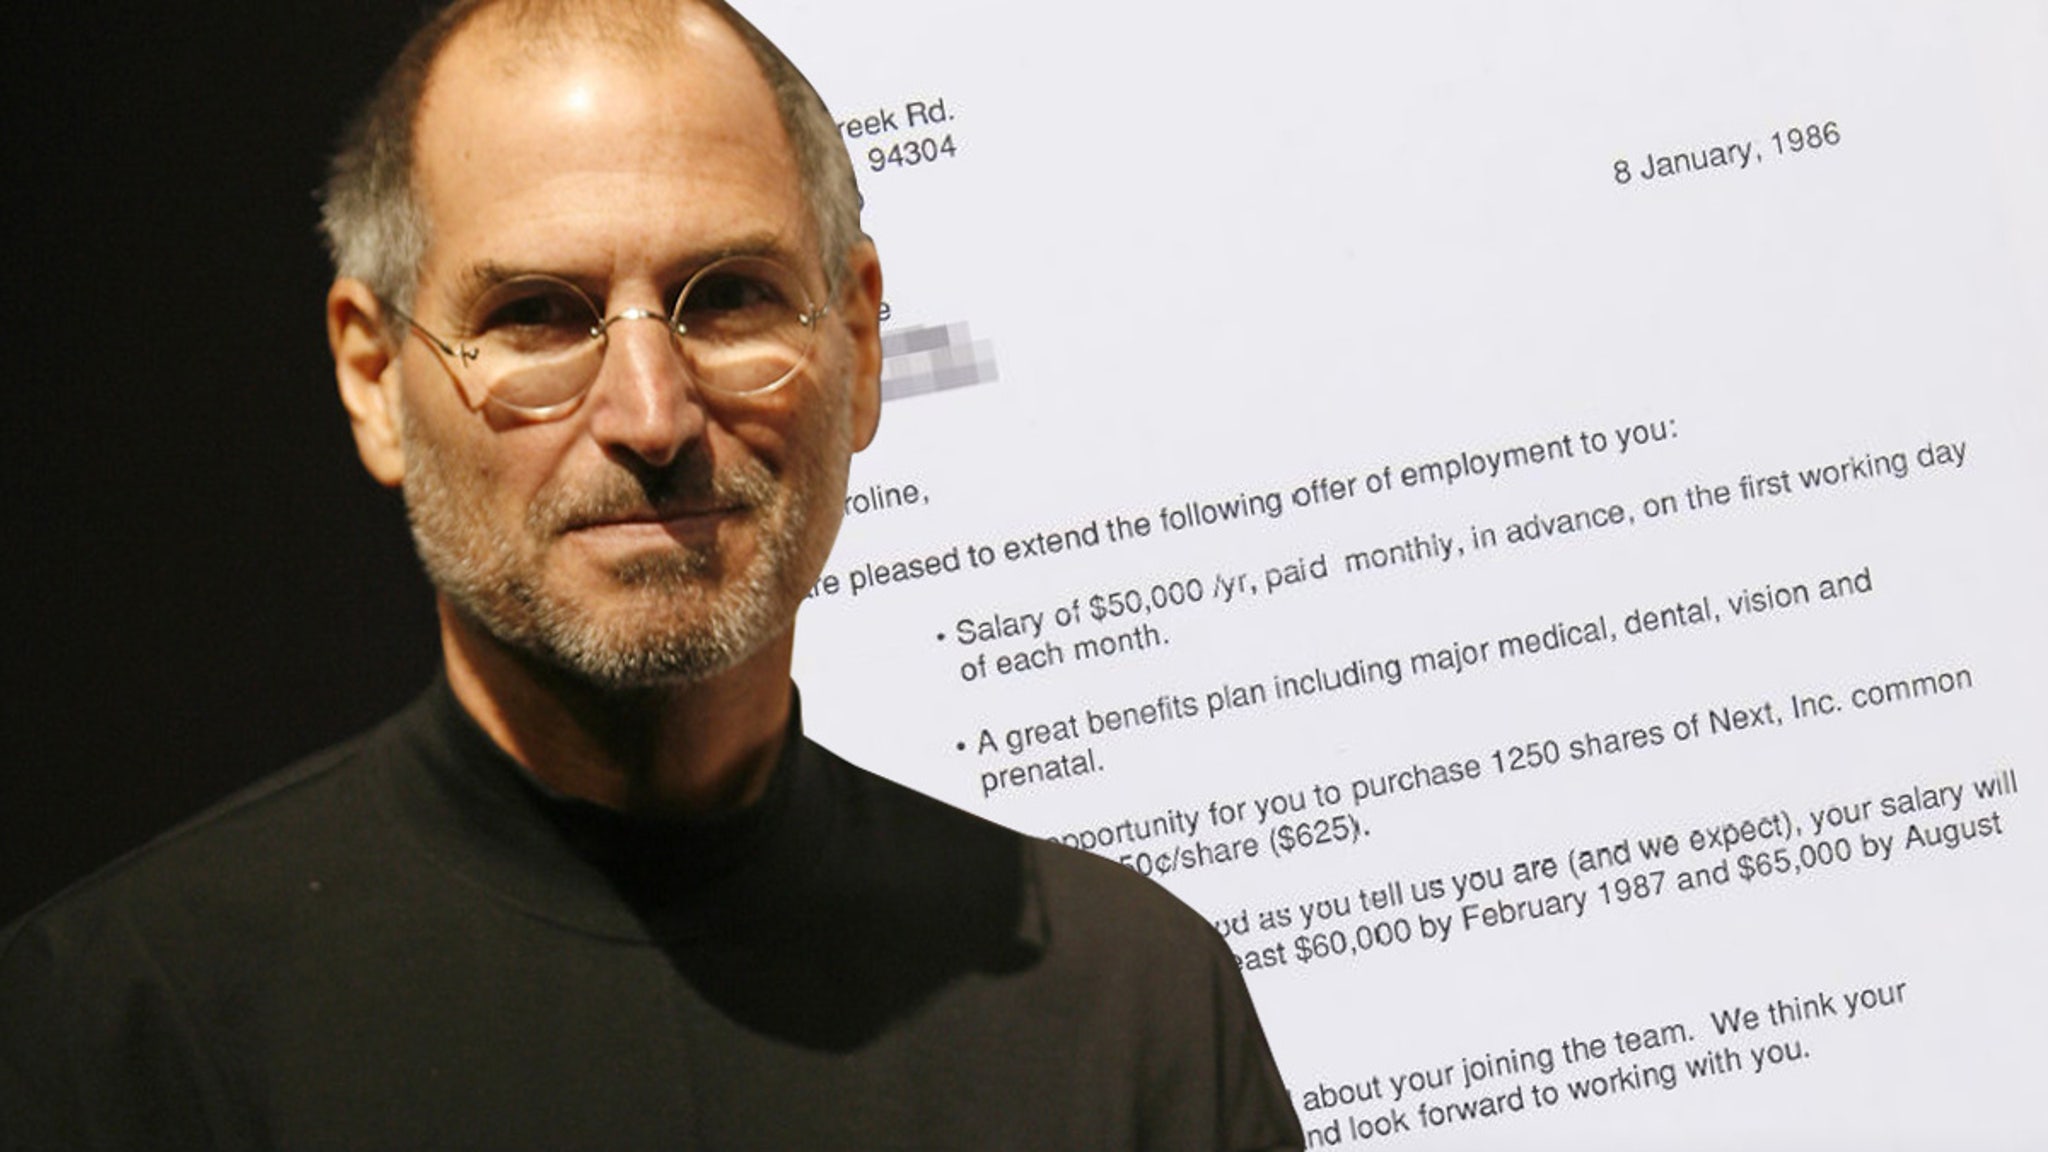 Steve Jobs’ Signed Offer Of Employment From 1986 On Sale For $95K